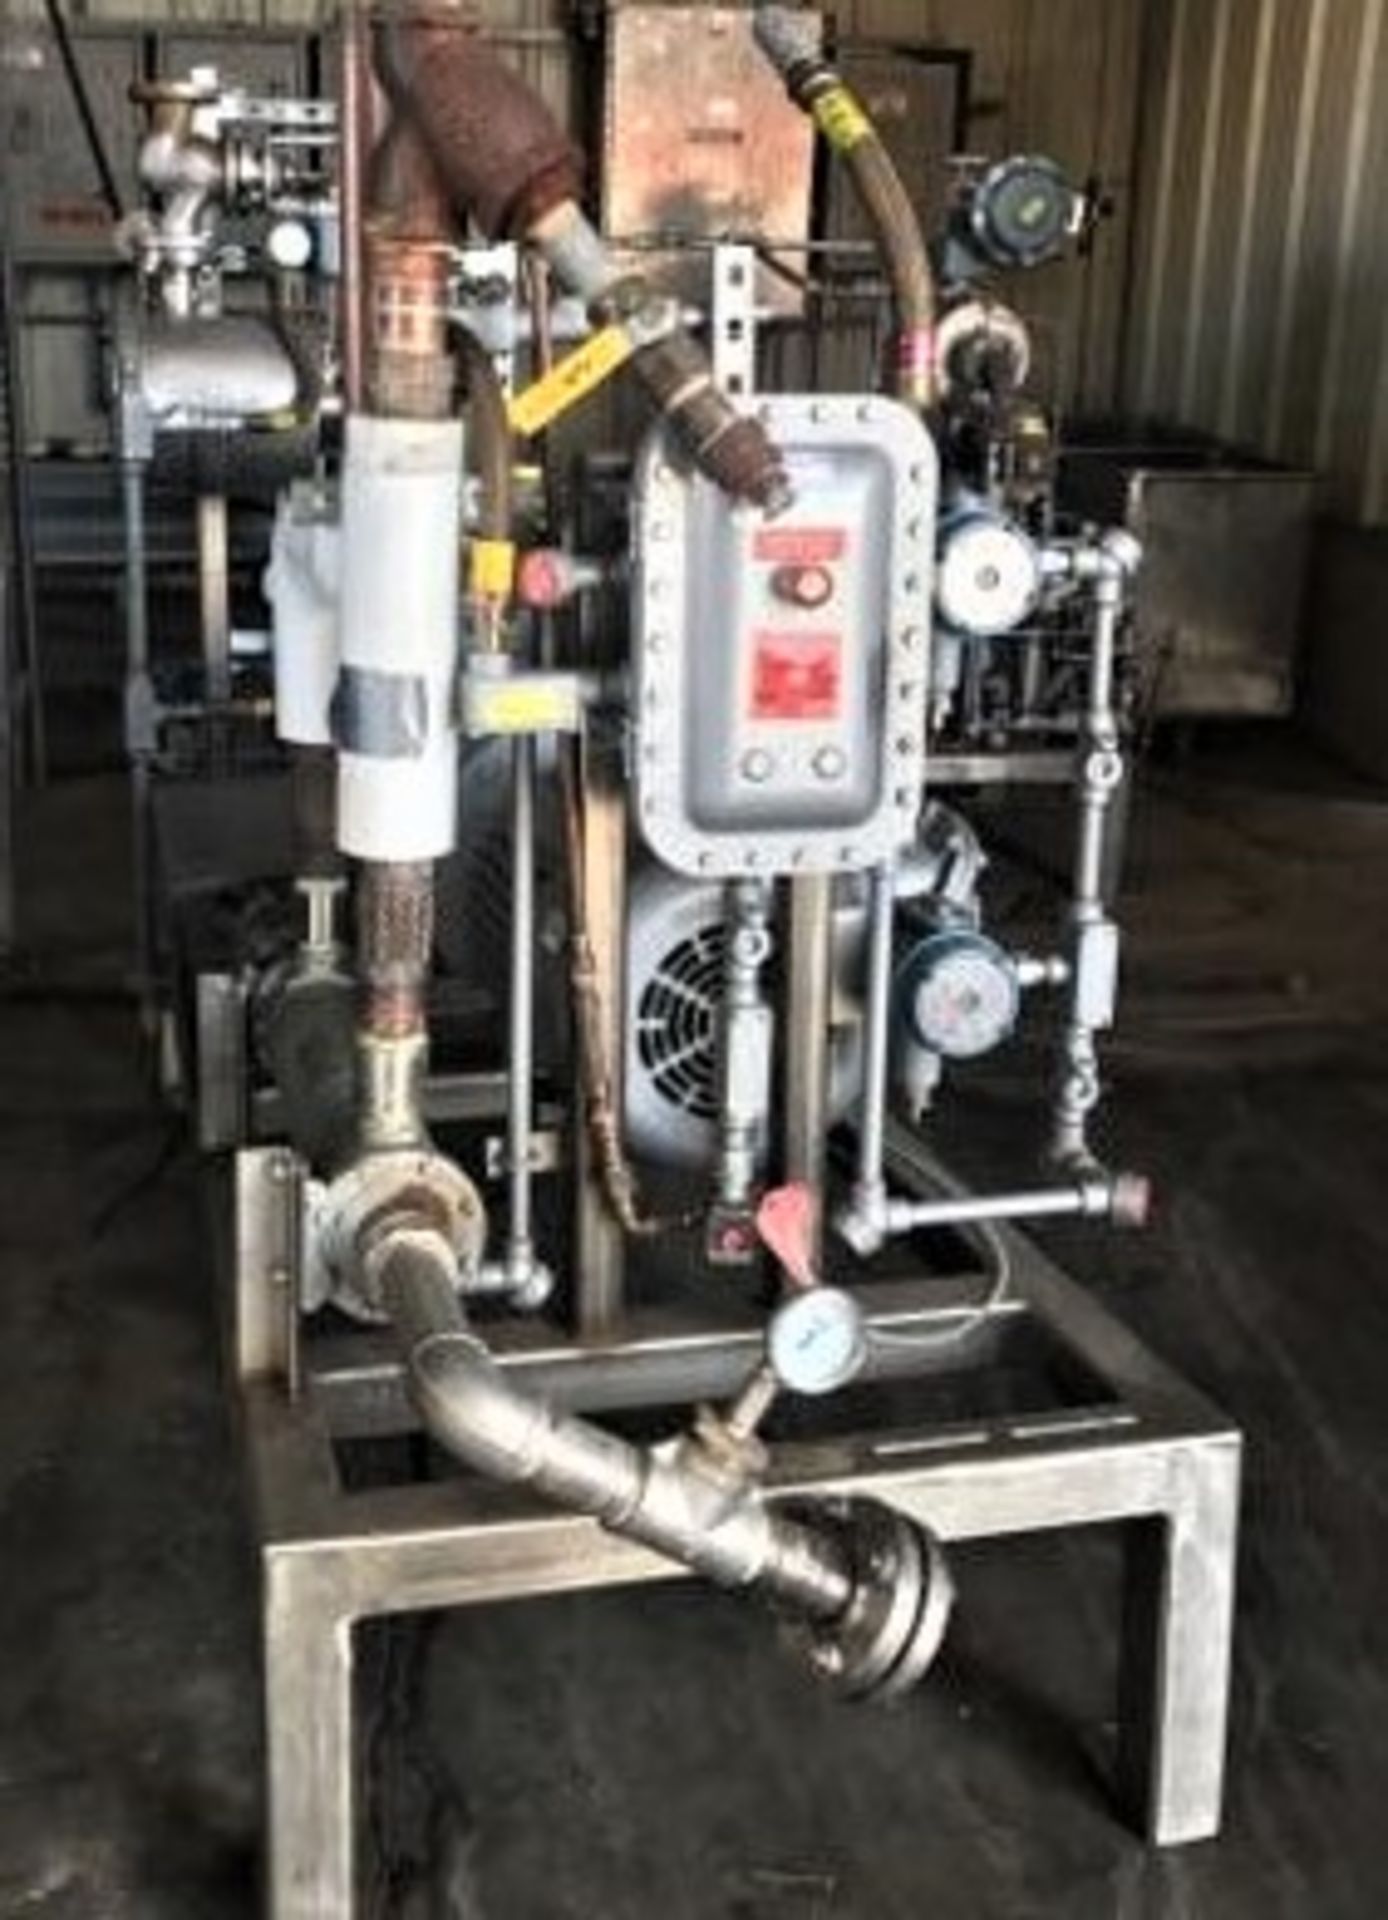 Busch 400 Vacuum pump. Busch skid mounted size 400 vacuum pump from pharmaceutical industry. With - Image 3 of 4